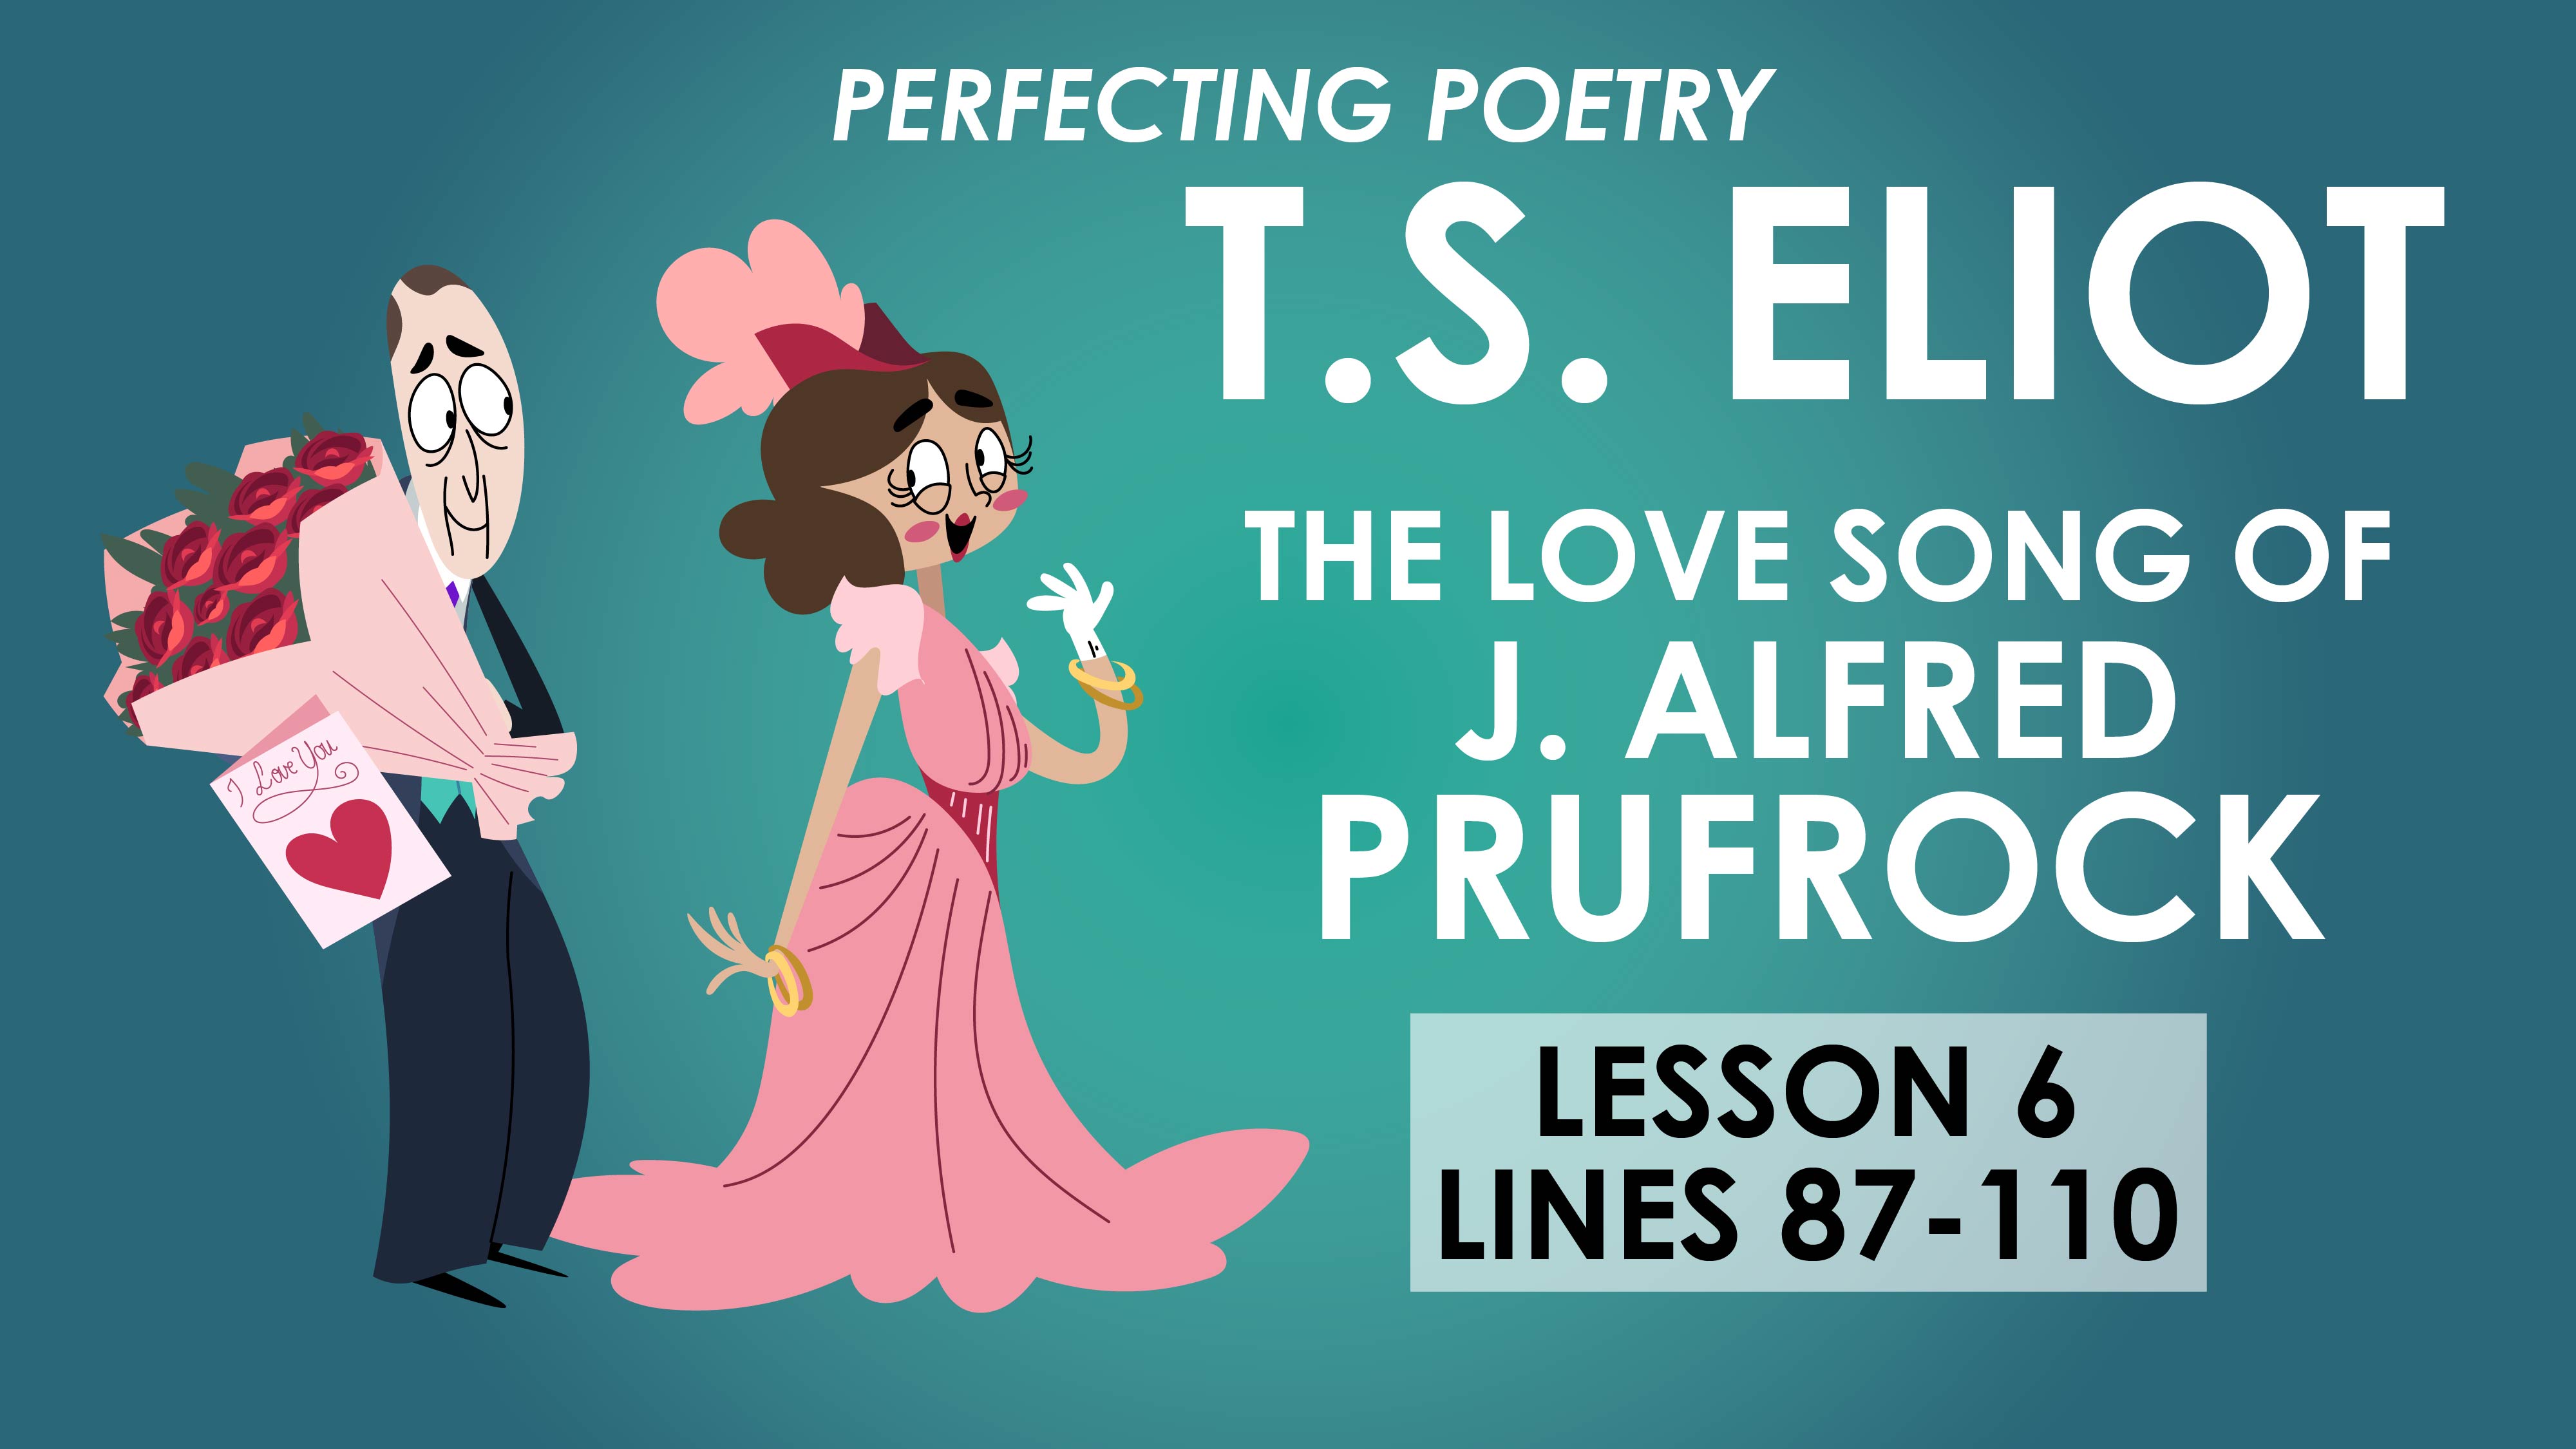 The Love Song of J. Alfred Prufrock - Lesson 6 - T.S. Eliot - Perfecting Poetry